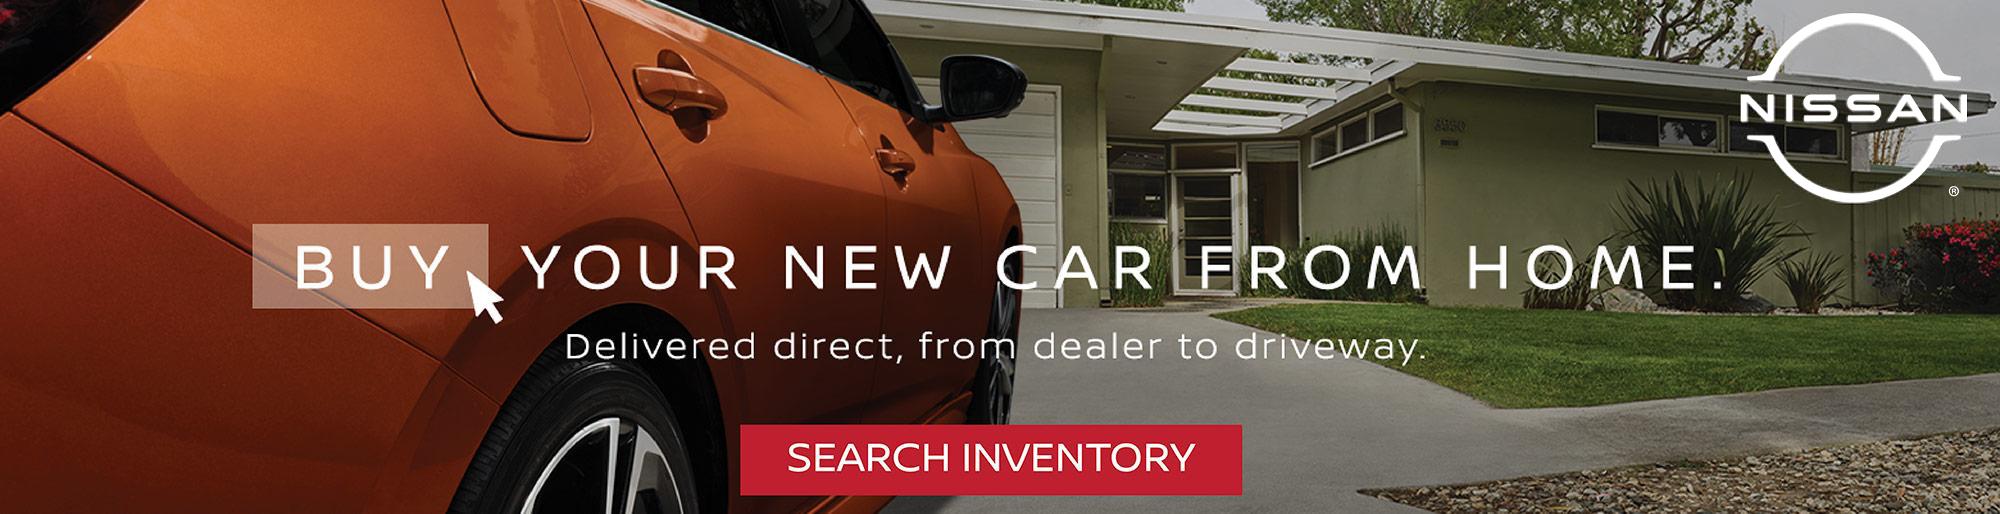 Buy Your New Car From Home